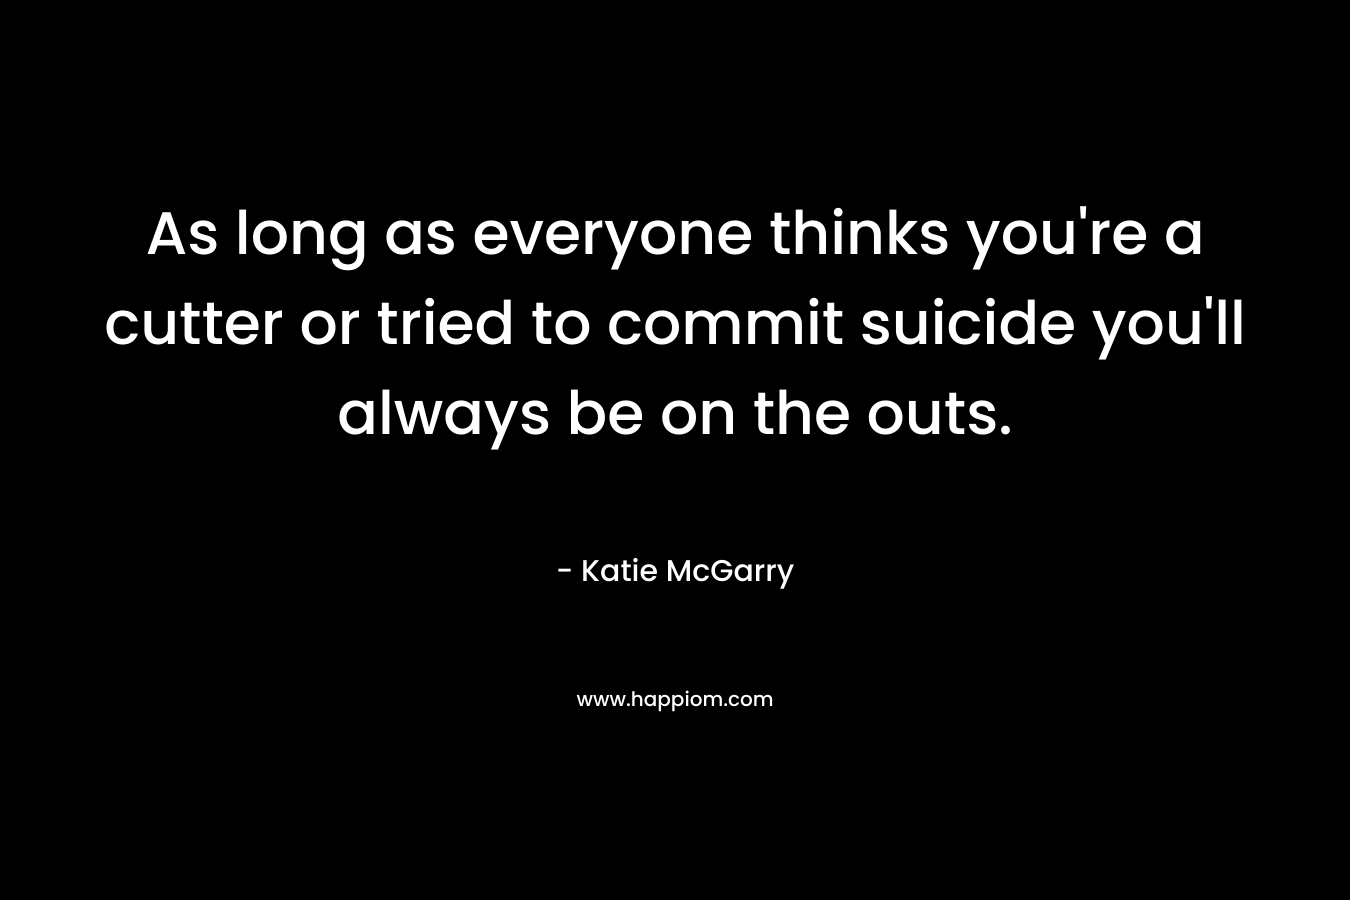 As long as everyone thinks you’re a cutter or tried to commit suicide you’ll always be on the outs. – Katie McGarry